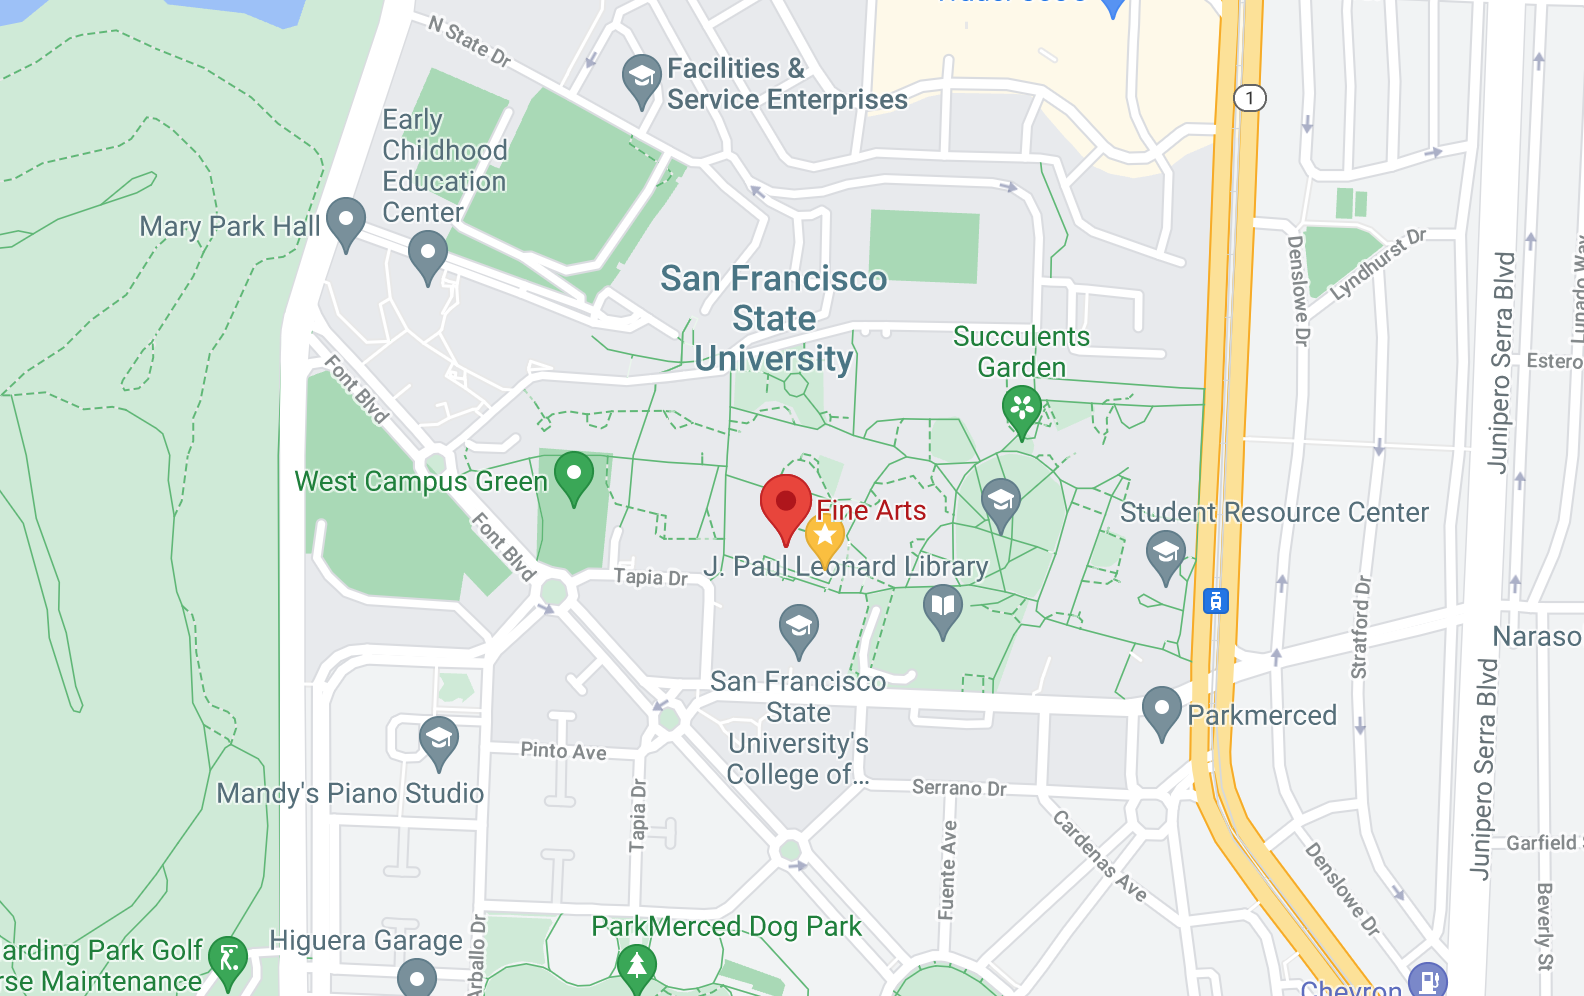 Google Map of Fine Arts Building and SF State Campus